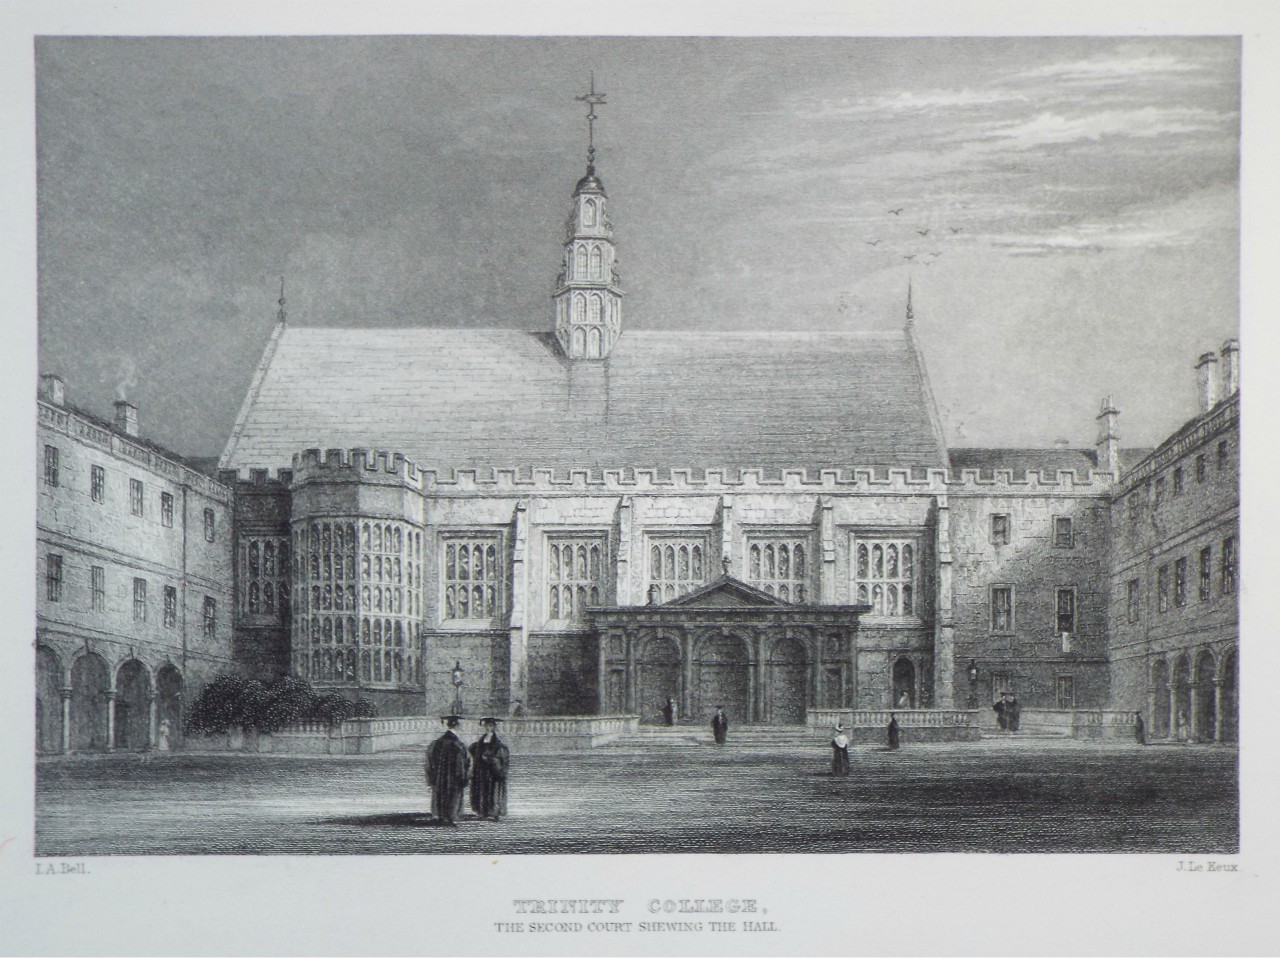 Print - Trinity College, The Second Court shewing the Hall. - Le